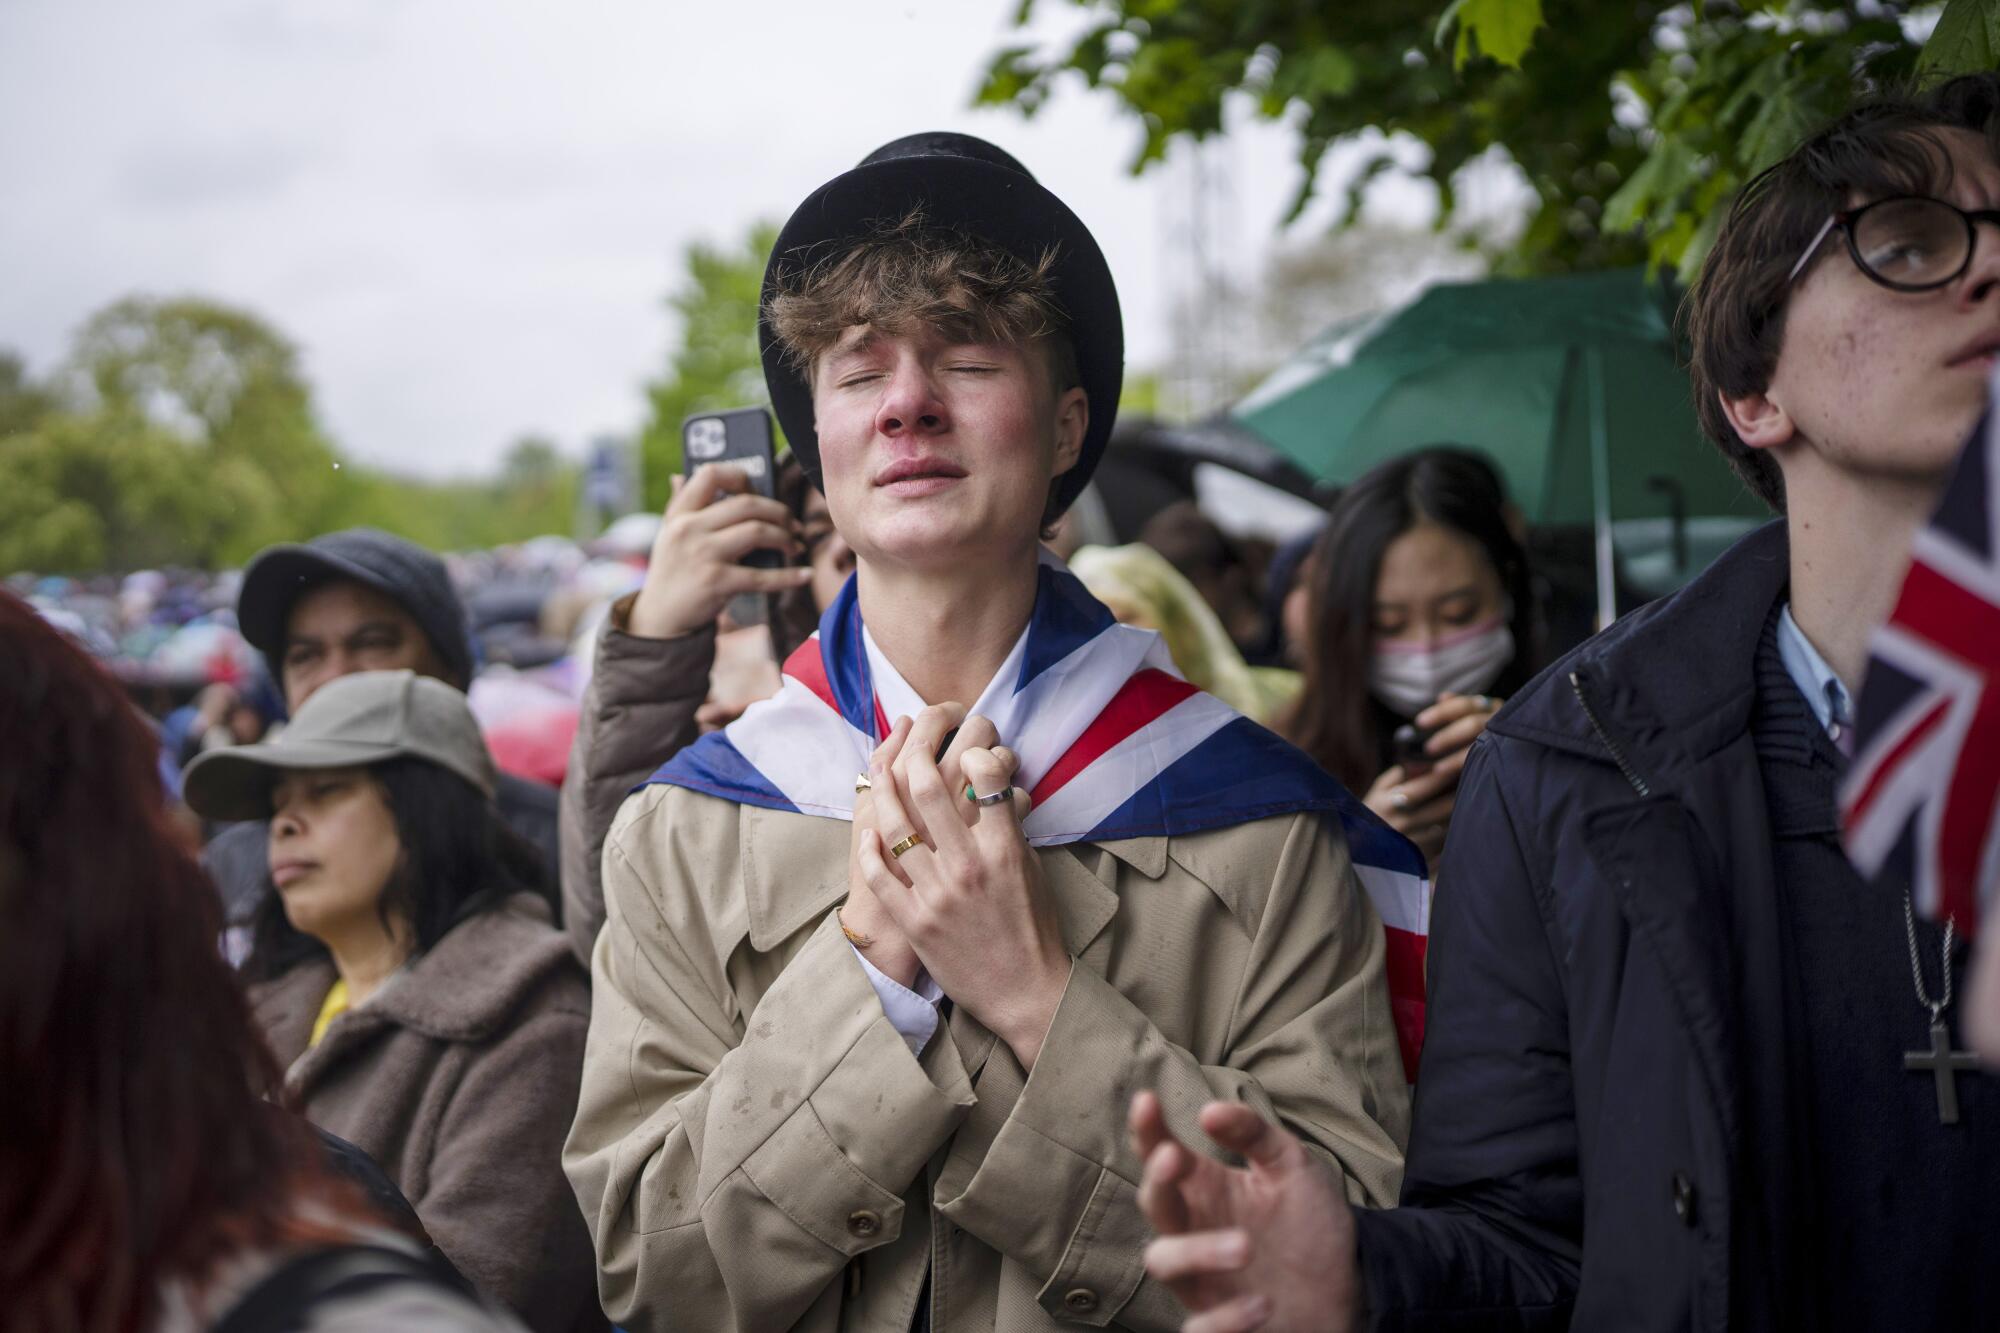 Ben Weller reacts as he watches the Britain's King Charles III coronation ceremony on a screen in London's Hyde Park.